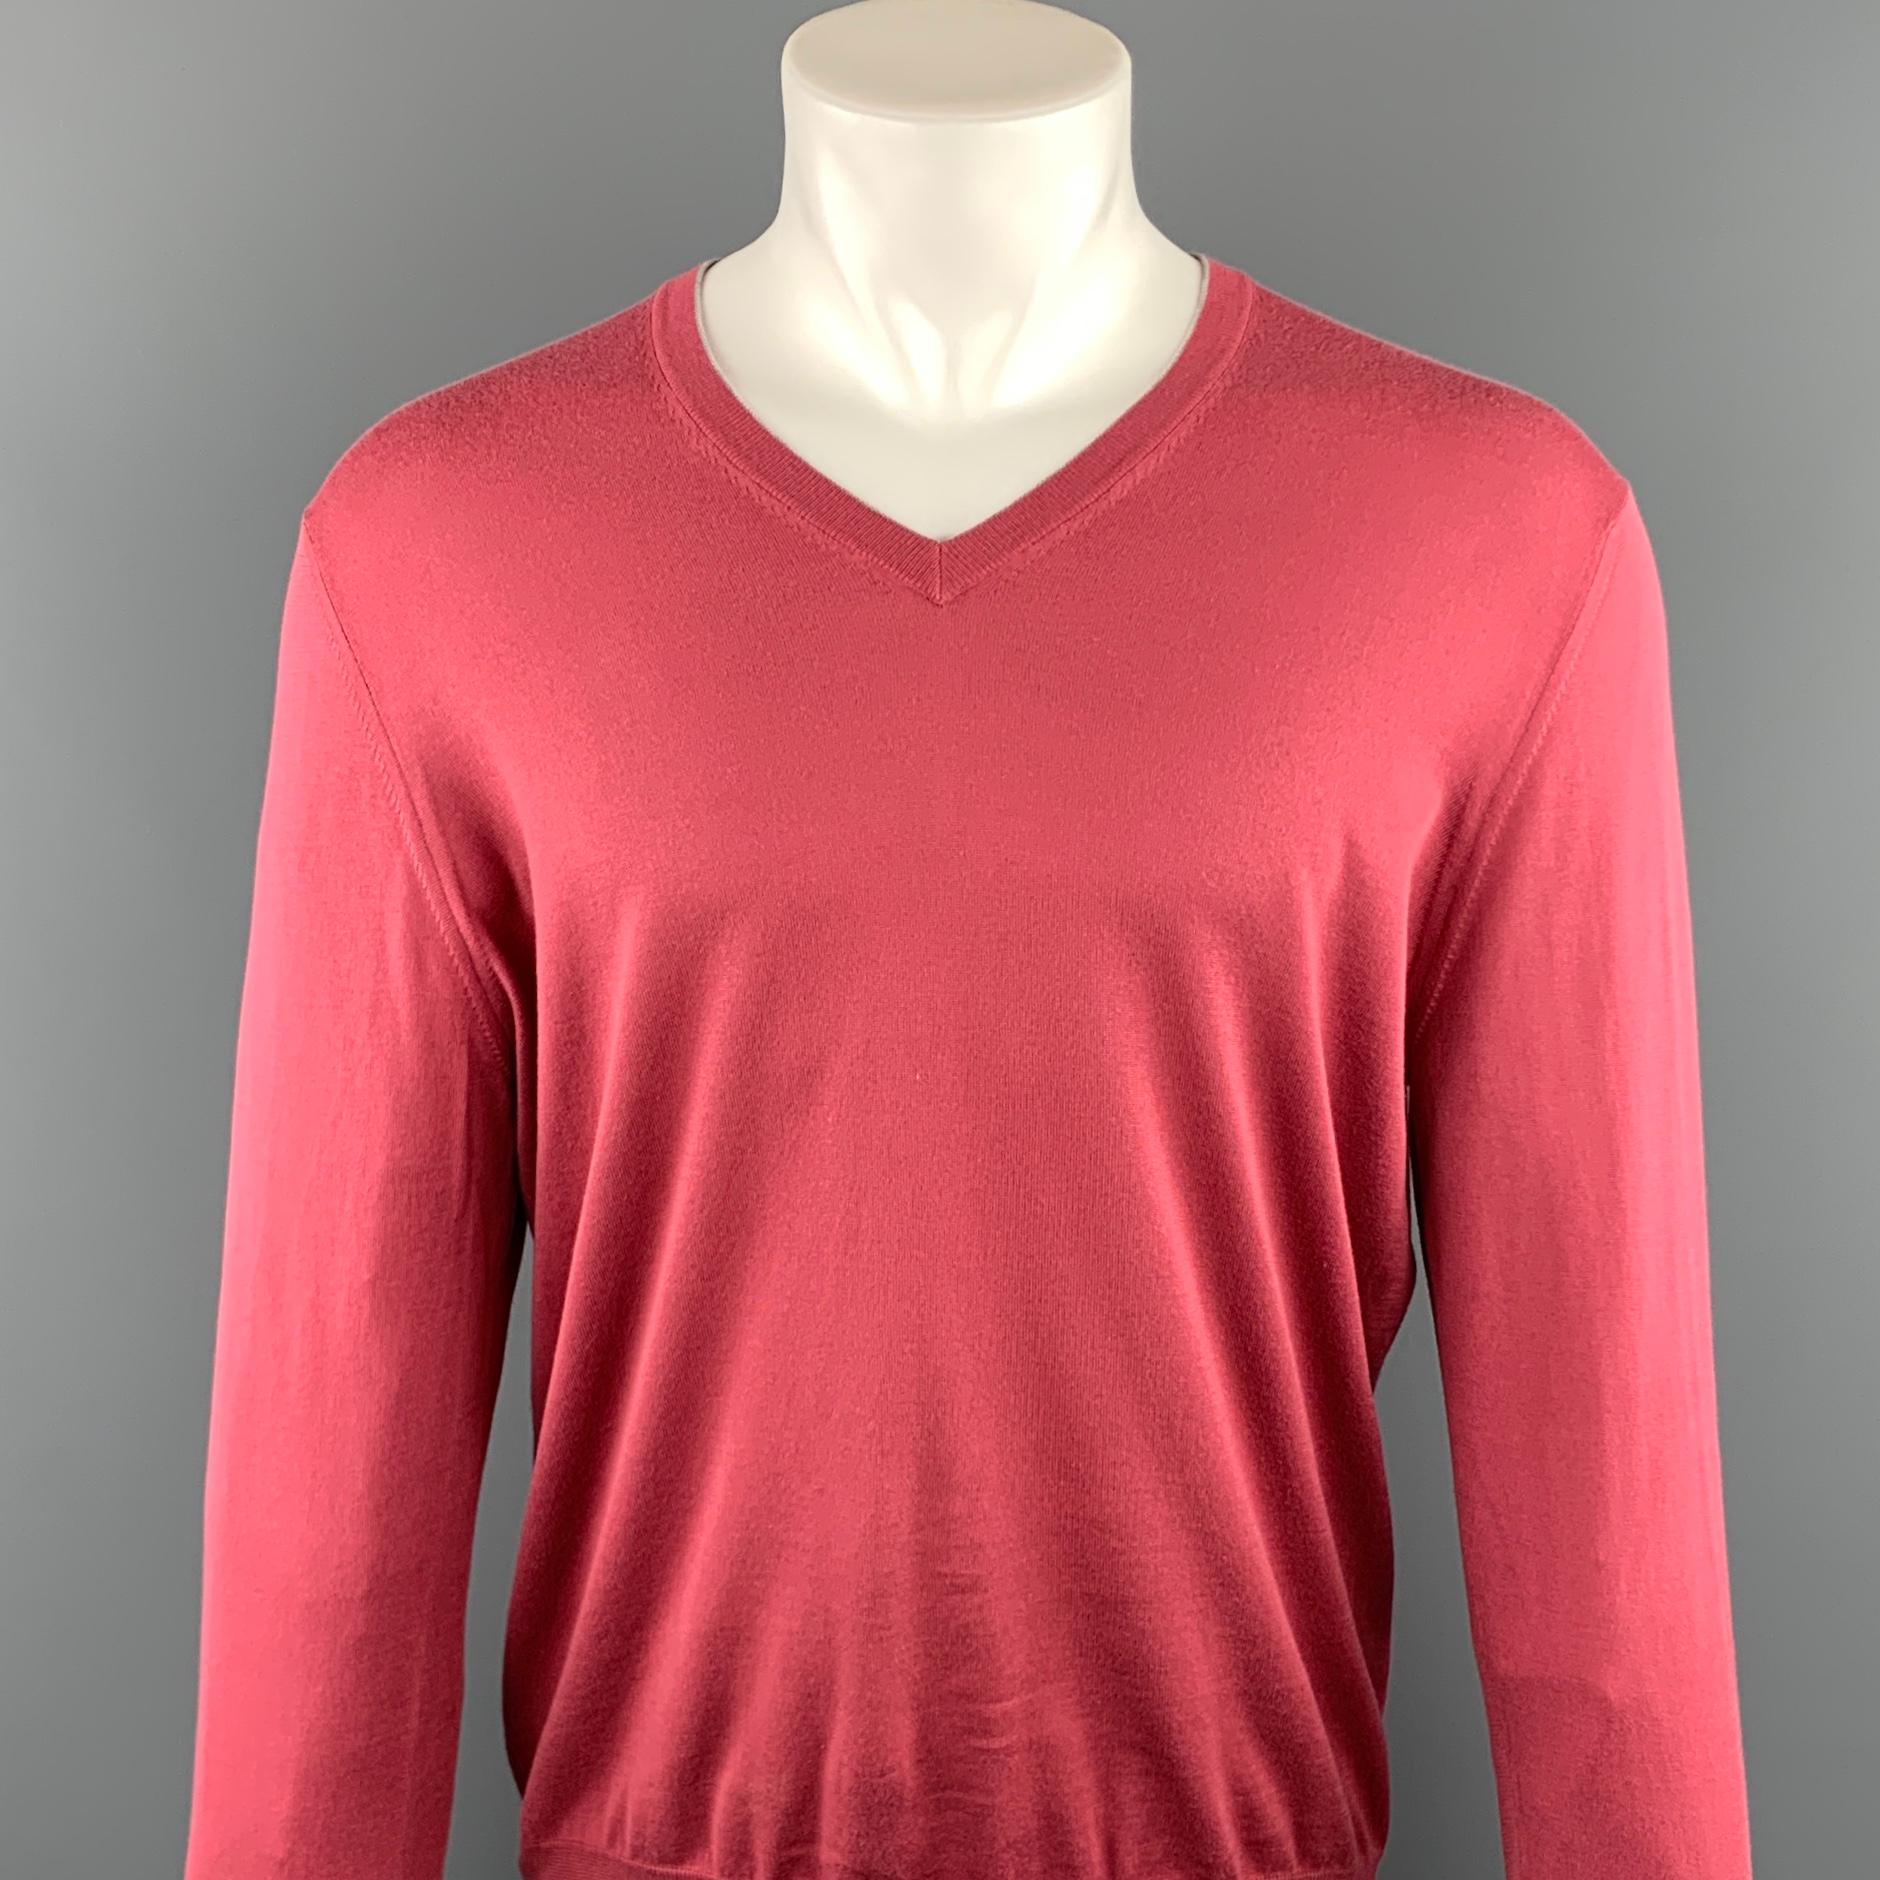 BRUNELLO CUCINELLI pullover comes in a salmon cotton featuring a v-neck. Made in Italy.

Excellent Pre-Owned Condition.
Marked: IT 50 

Measurements:

Shoulder: 19 in. 
Chest: 46 in. 
Sleeve: 27 in.
Length: 26.5 in. 